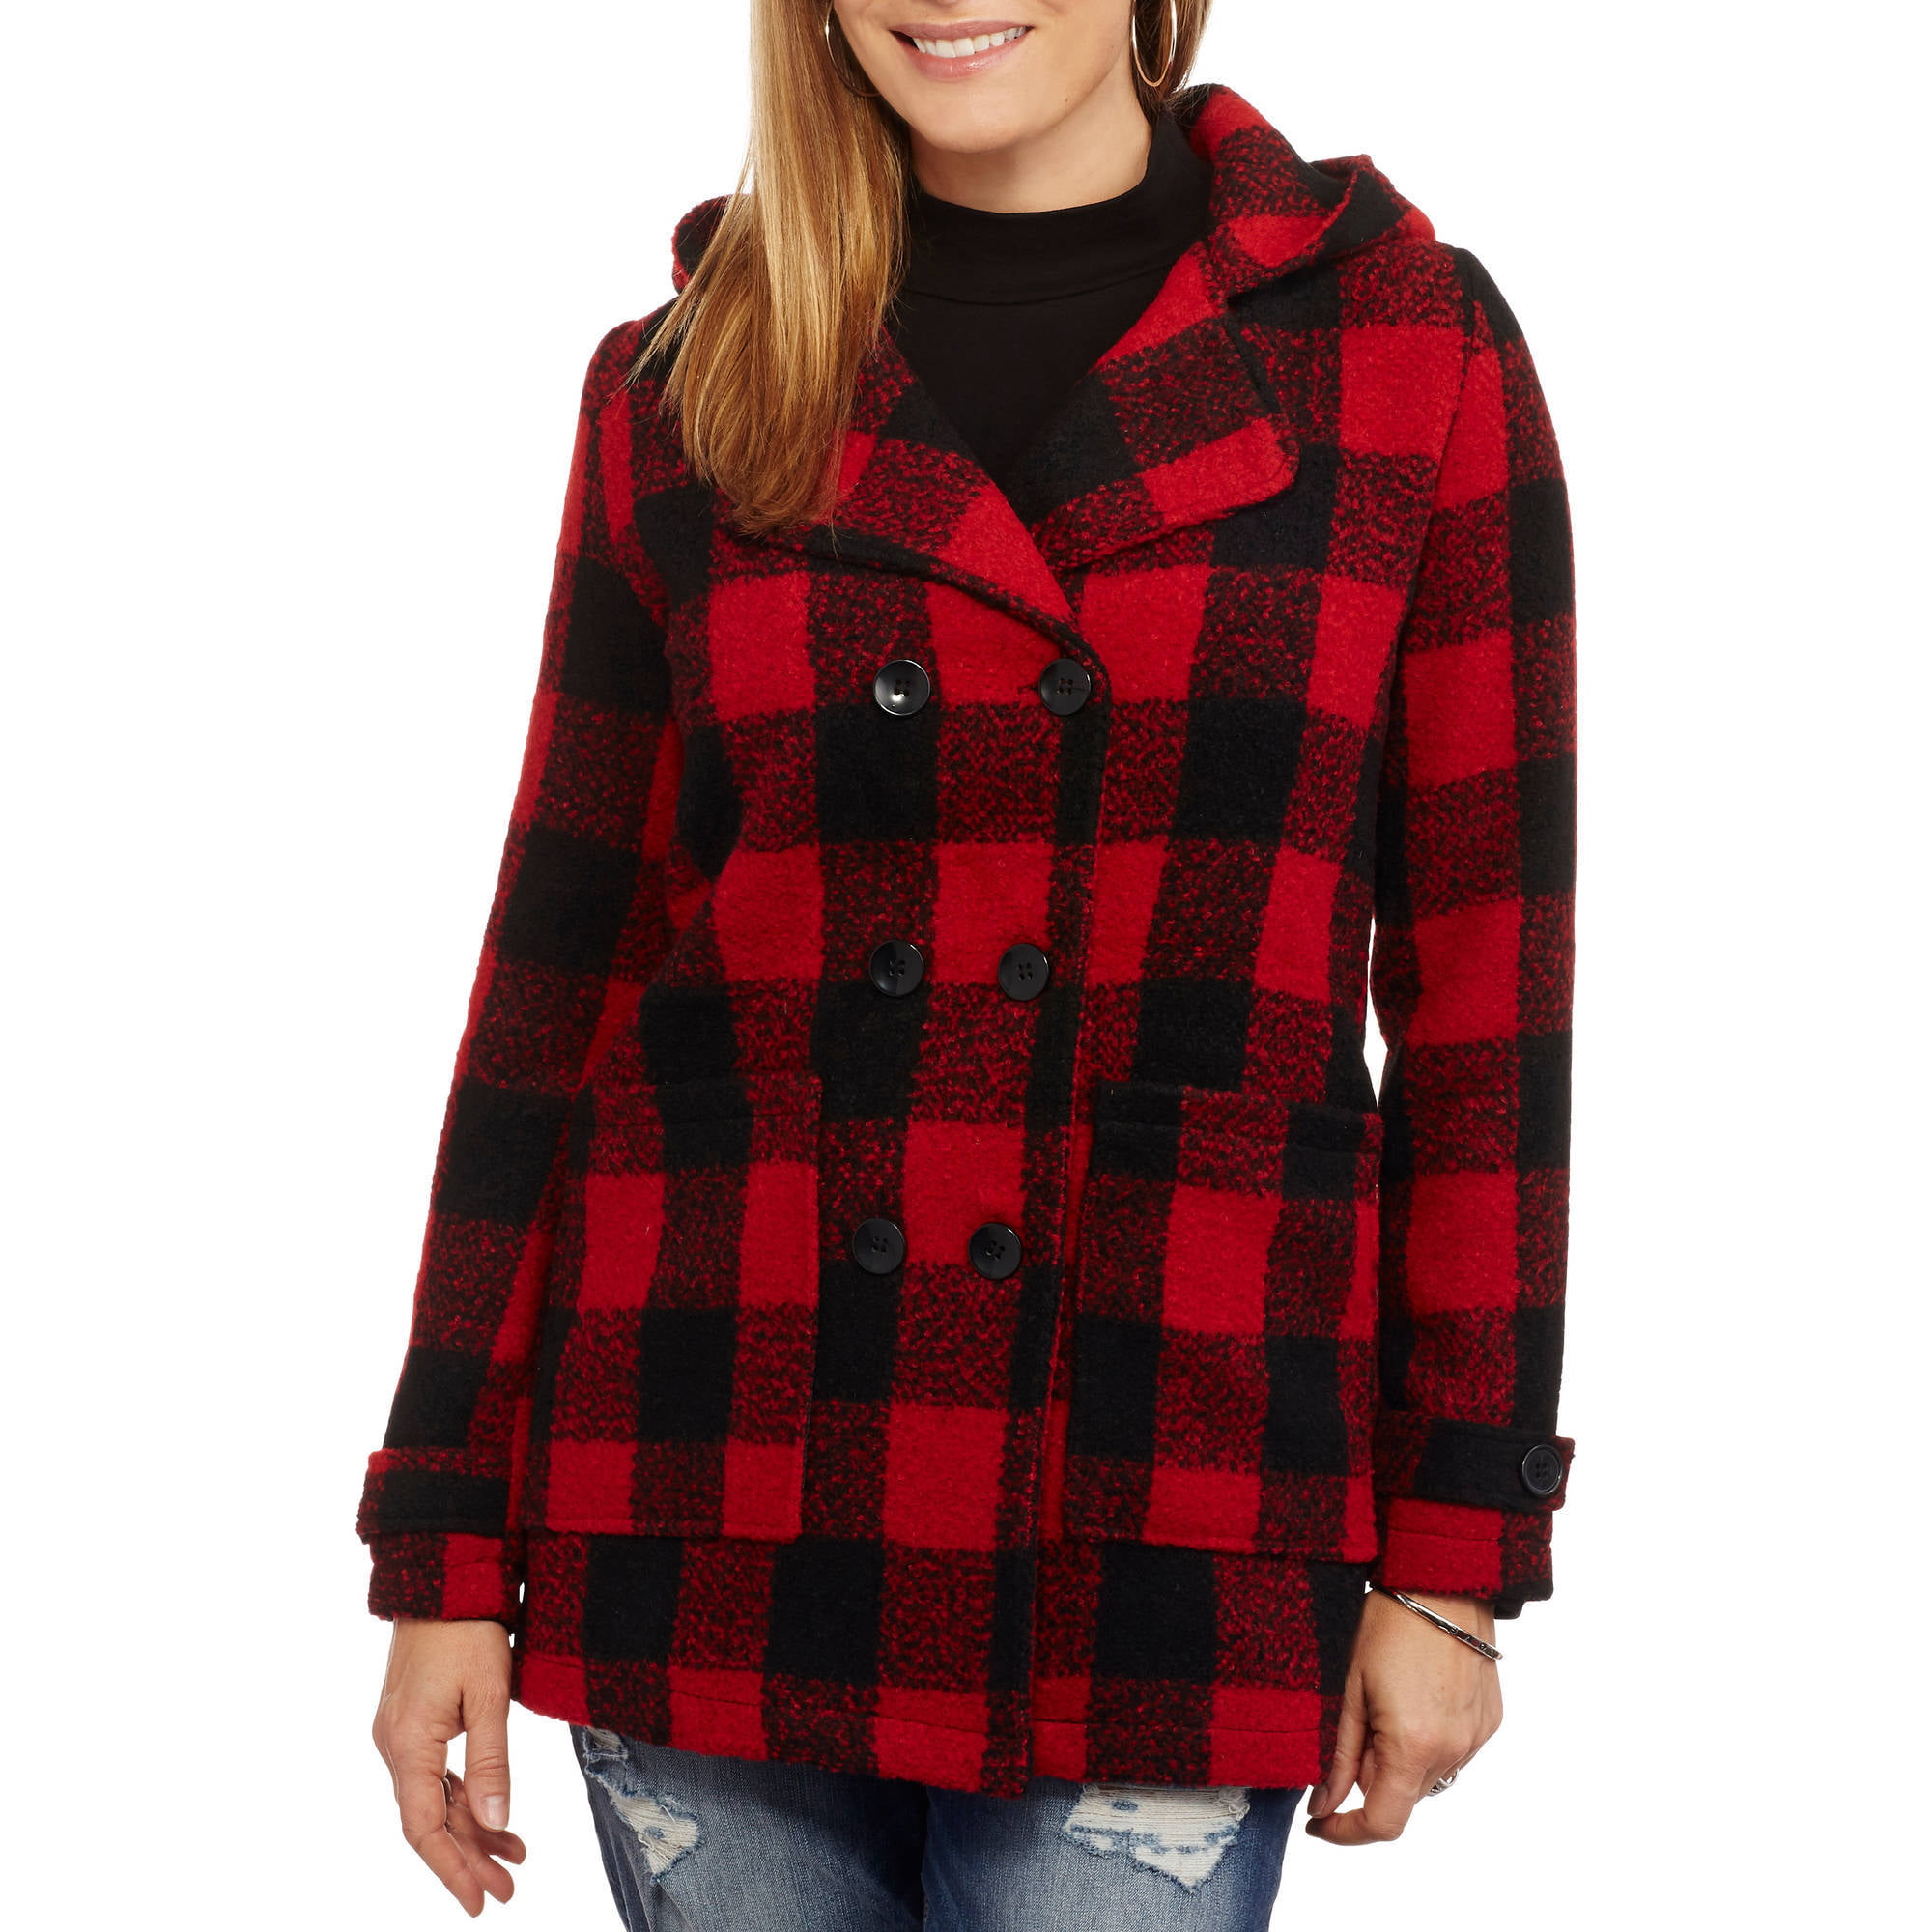 Maxwell Studio Women's Hooded Plaid Cape With Faux Leather Buckle ...